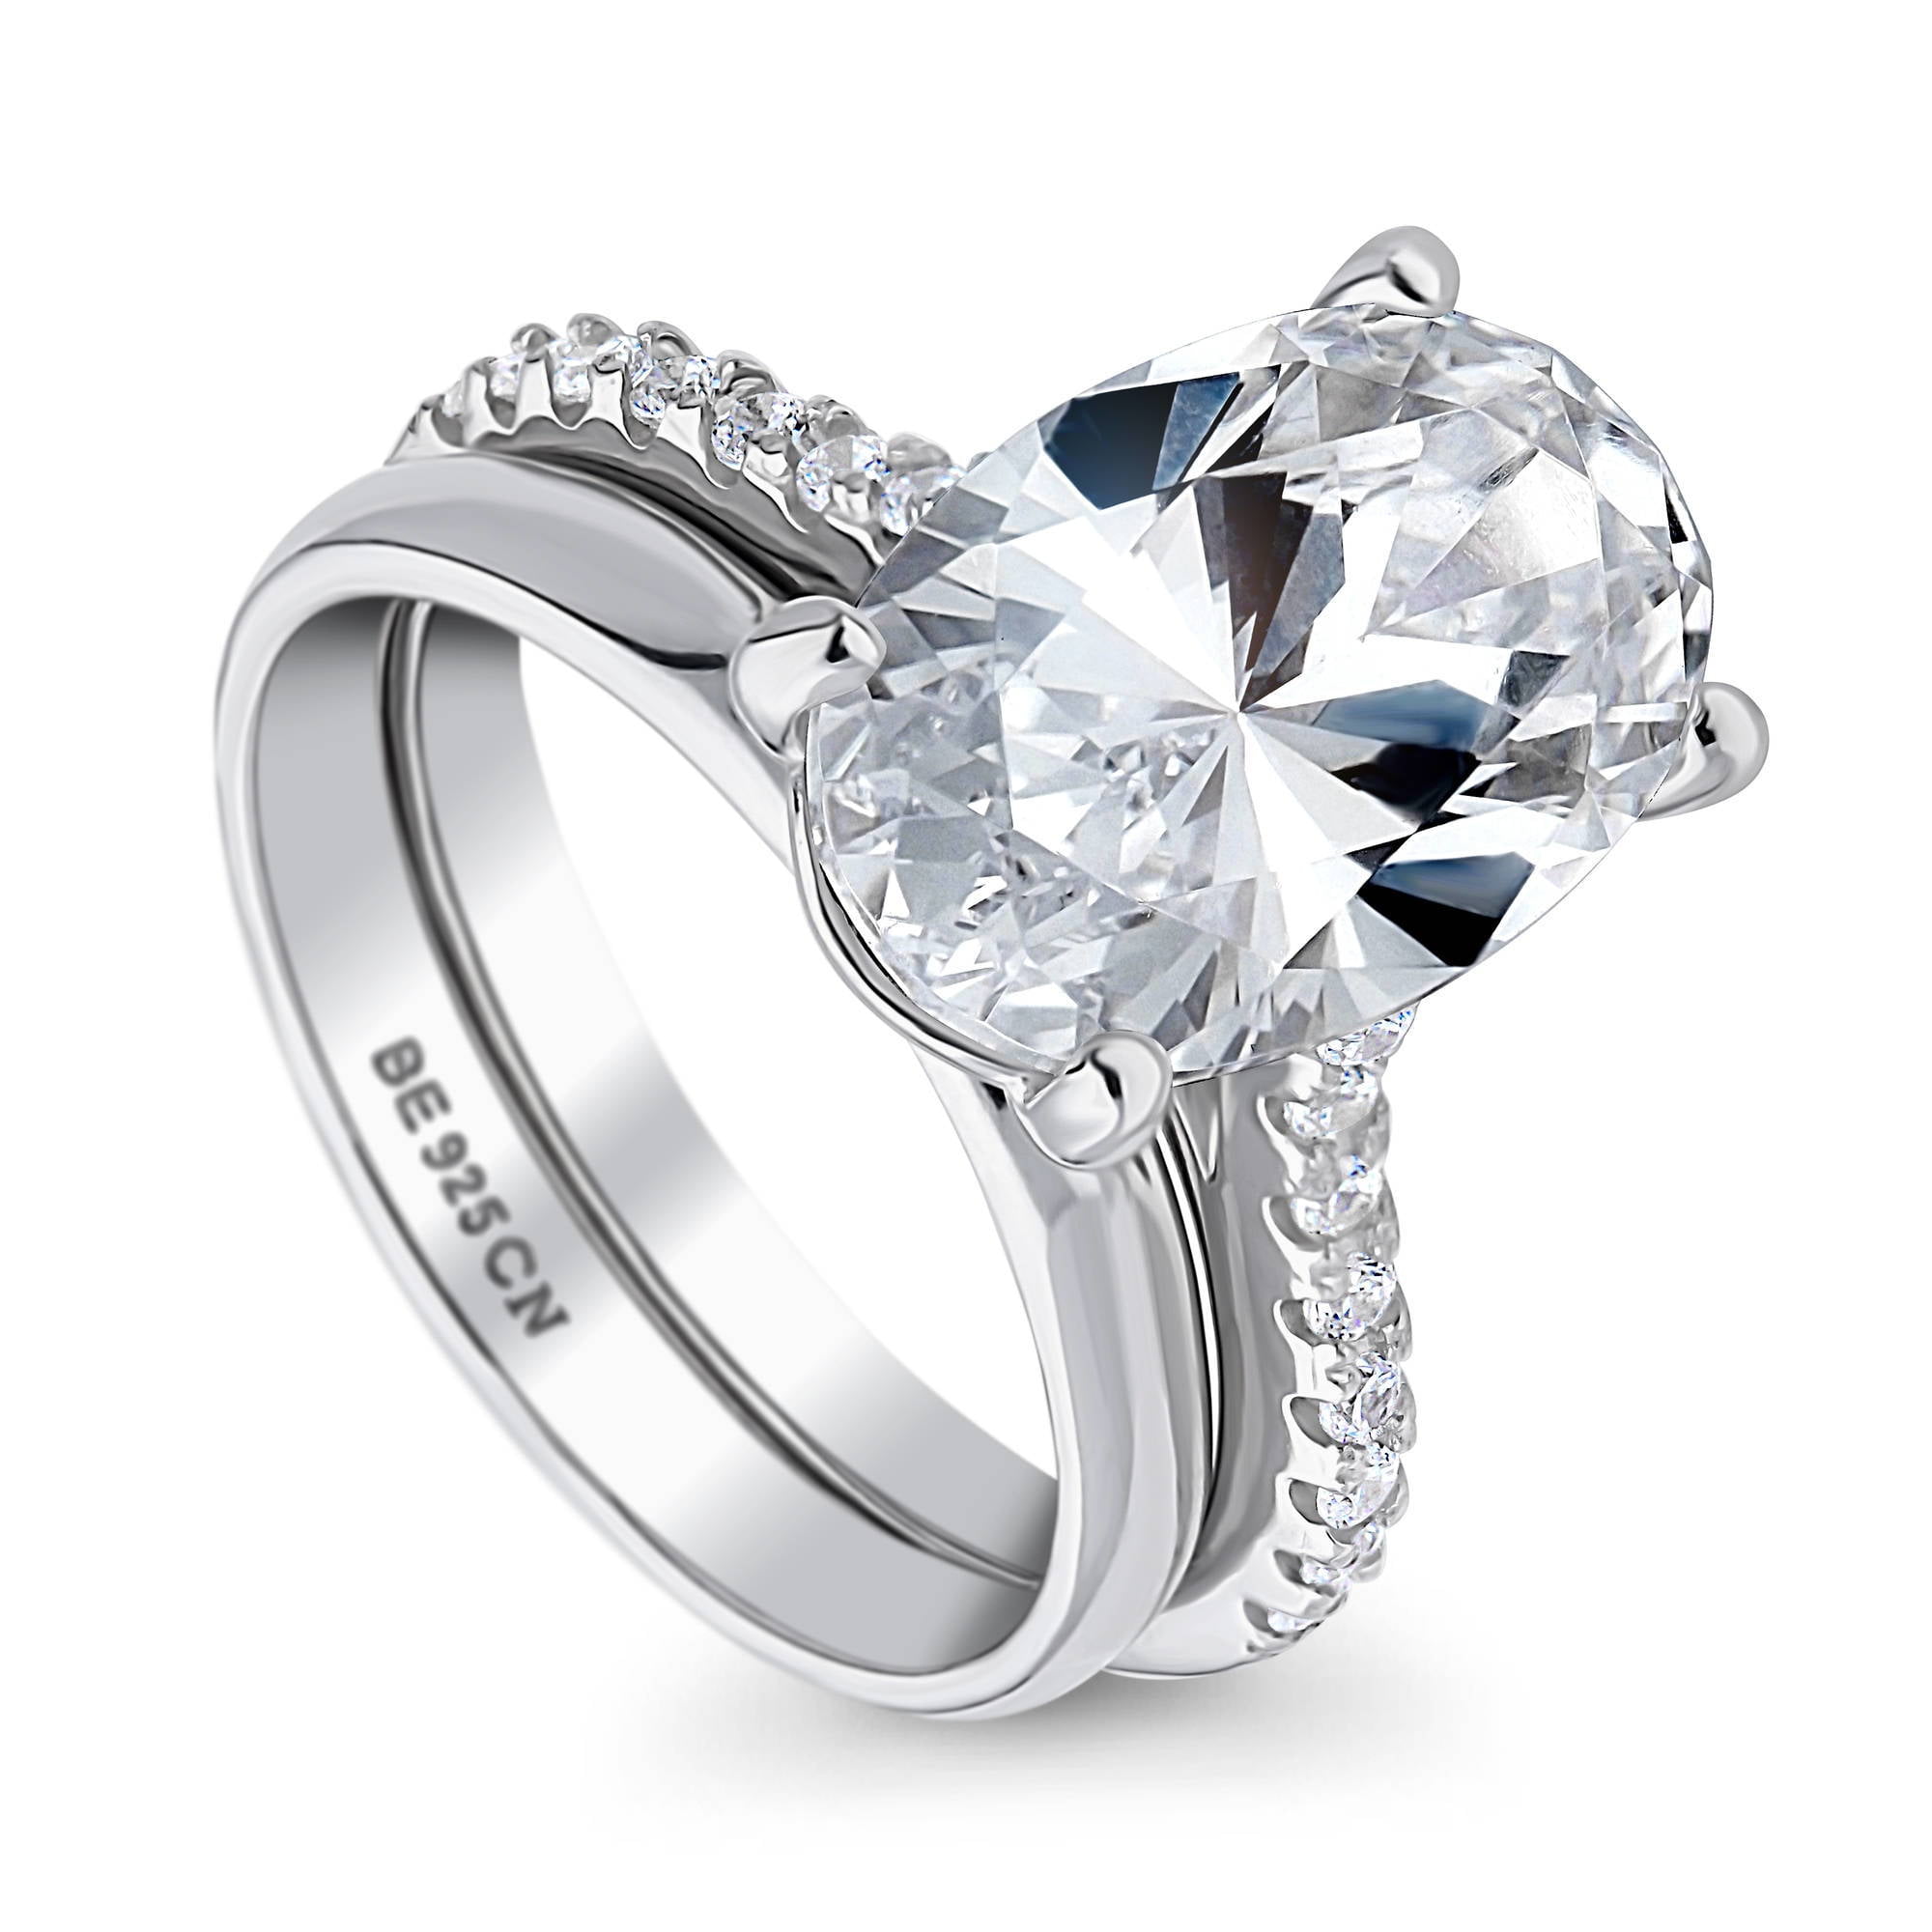 925 STERLING SILVER RHODIUM PLATED SOLITAIRE SIMULATED DIAMOND ENGAGEMENT RING